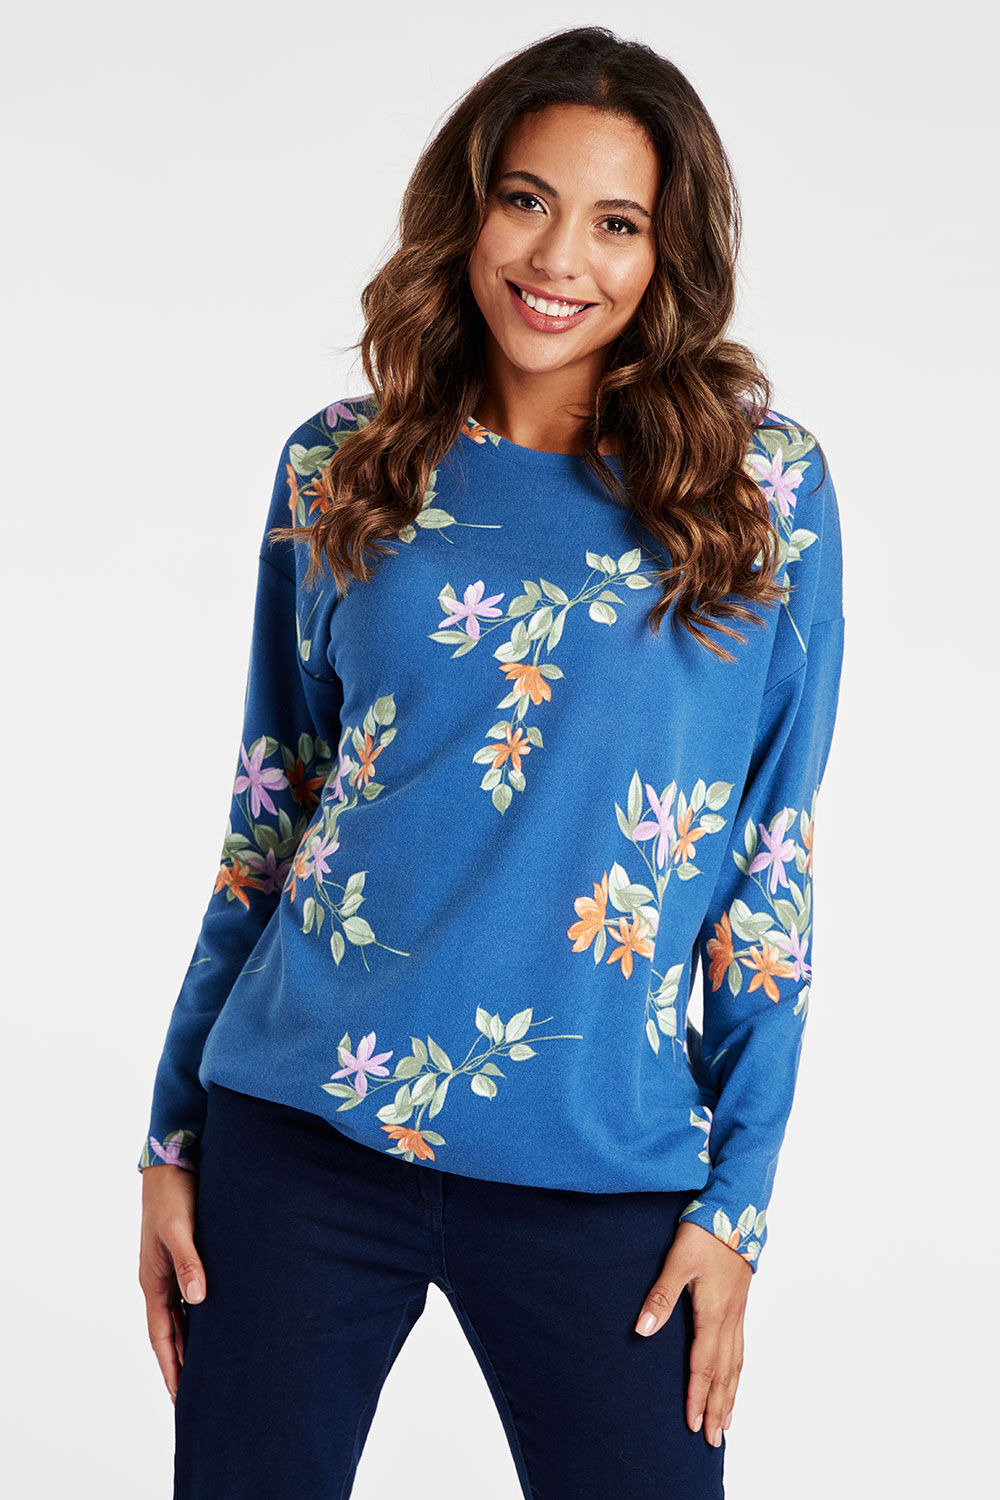 Bonmarche Navy Long Sleeve All Over Floral Print Soft Touch Top, Size: 20